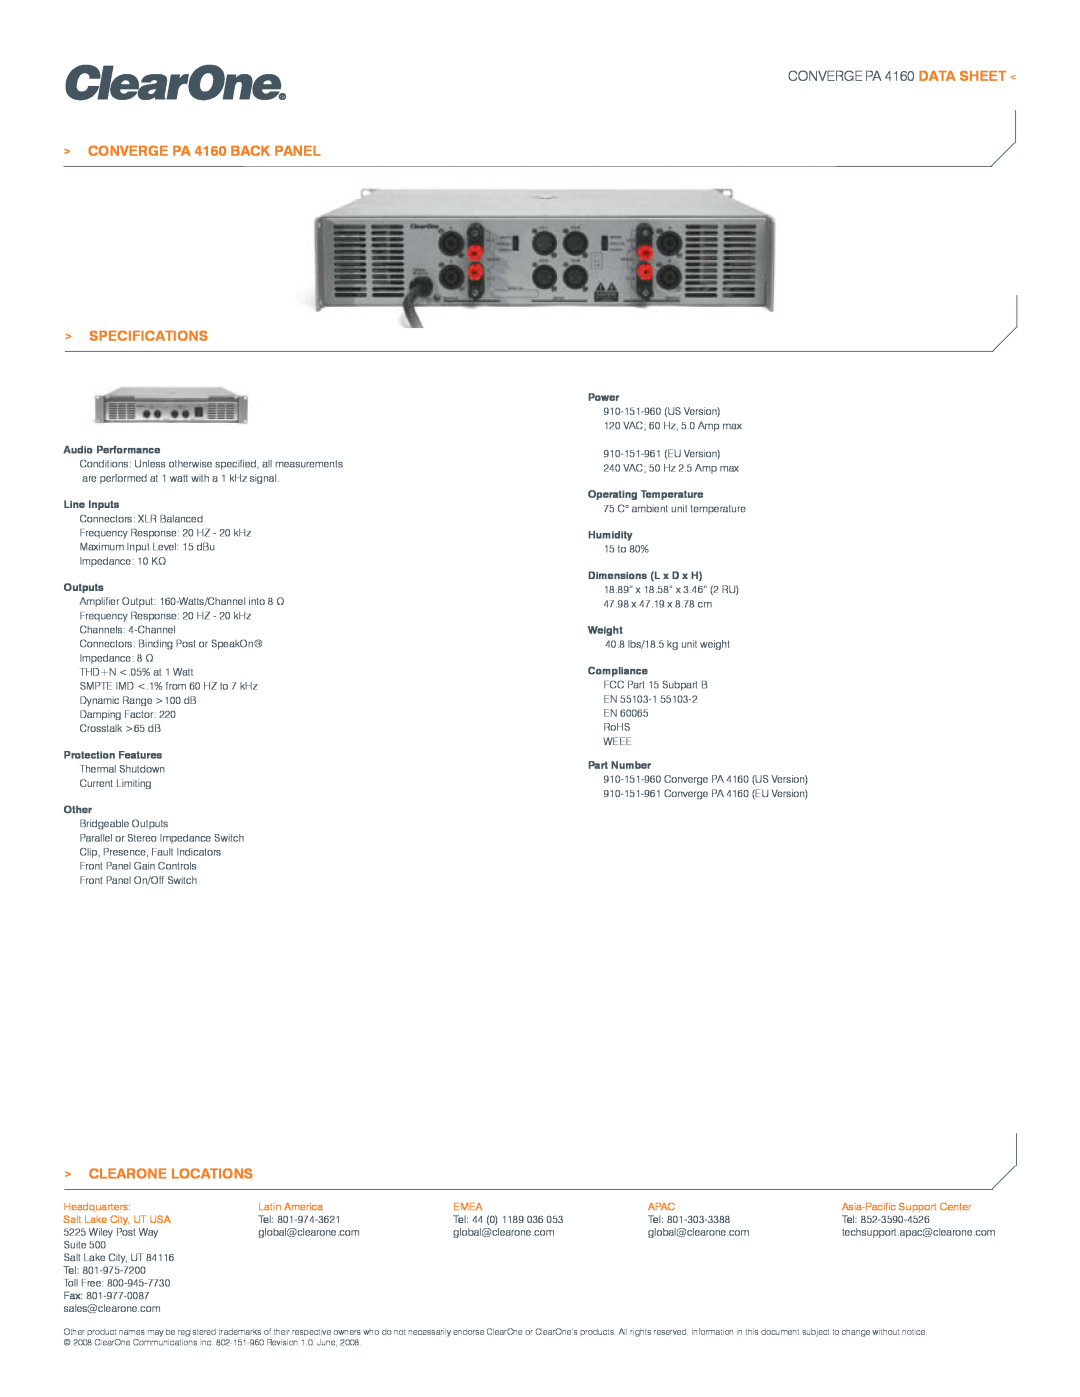 ClearOne comm CONVERGE PA 4160 BACK PANEL SPECIFICATIONS, Clearone Locations, Headquarters, Latin America, Emea, Apac 